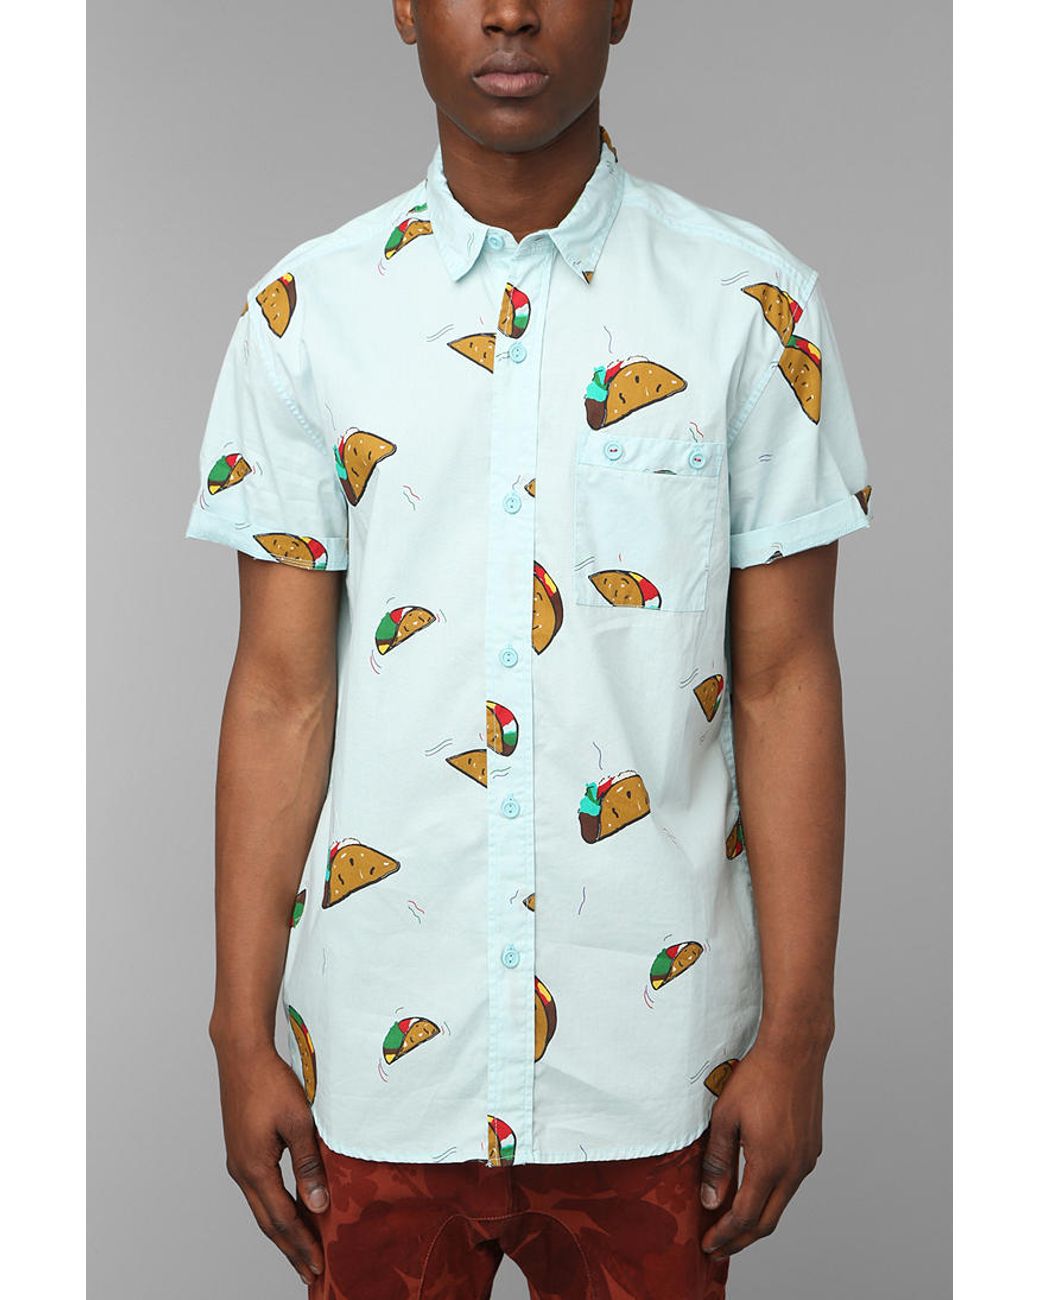 Urban Outfitters The Shirt for Men | Lyst